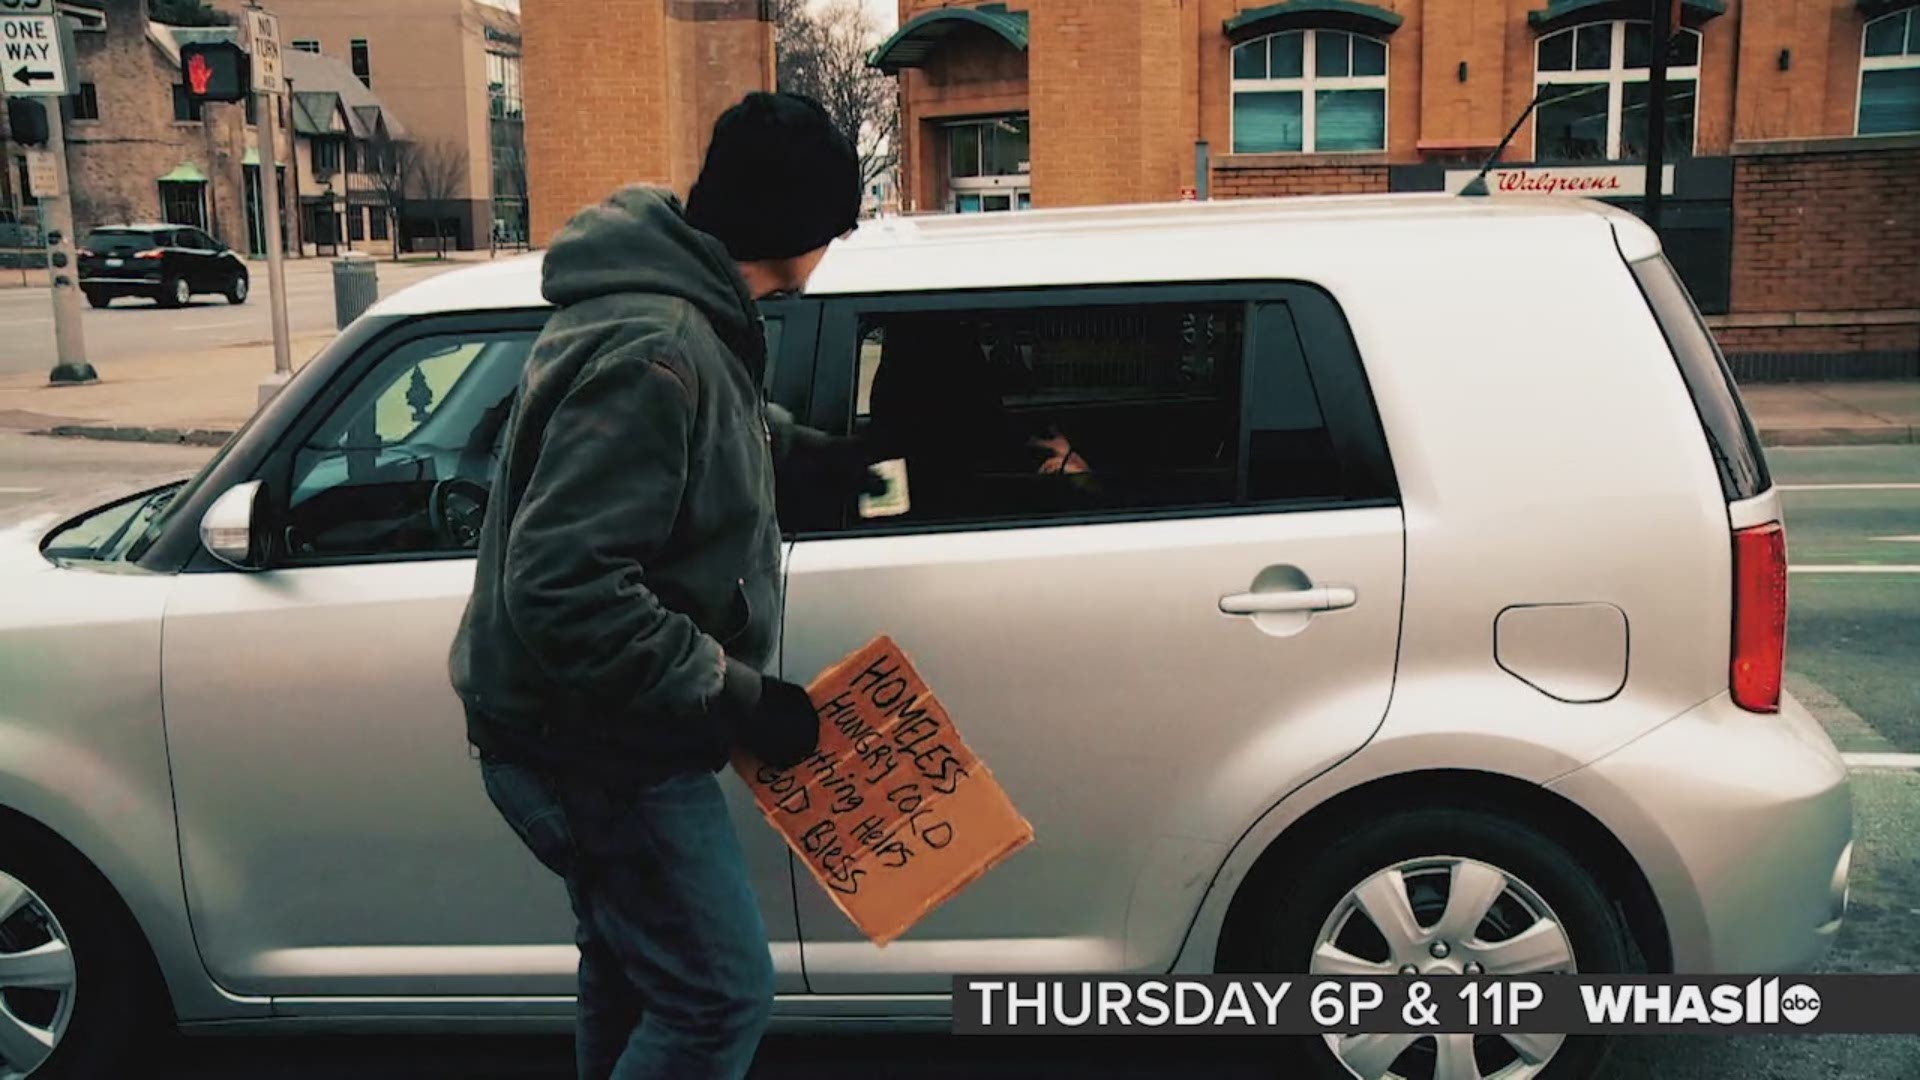 Check out John Charlton's two-part investigation into those begging for change, Thursday at 6 p.m. and 11 p.m.